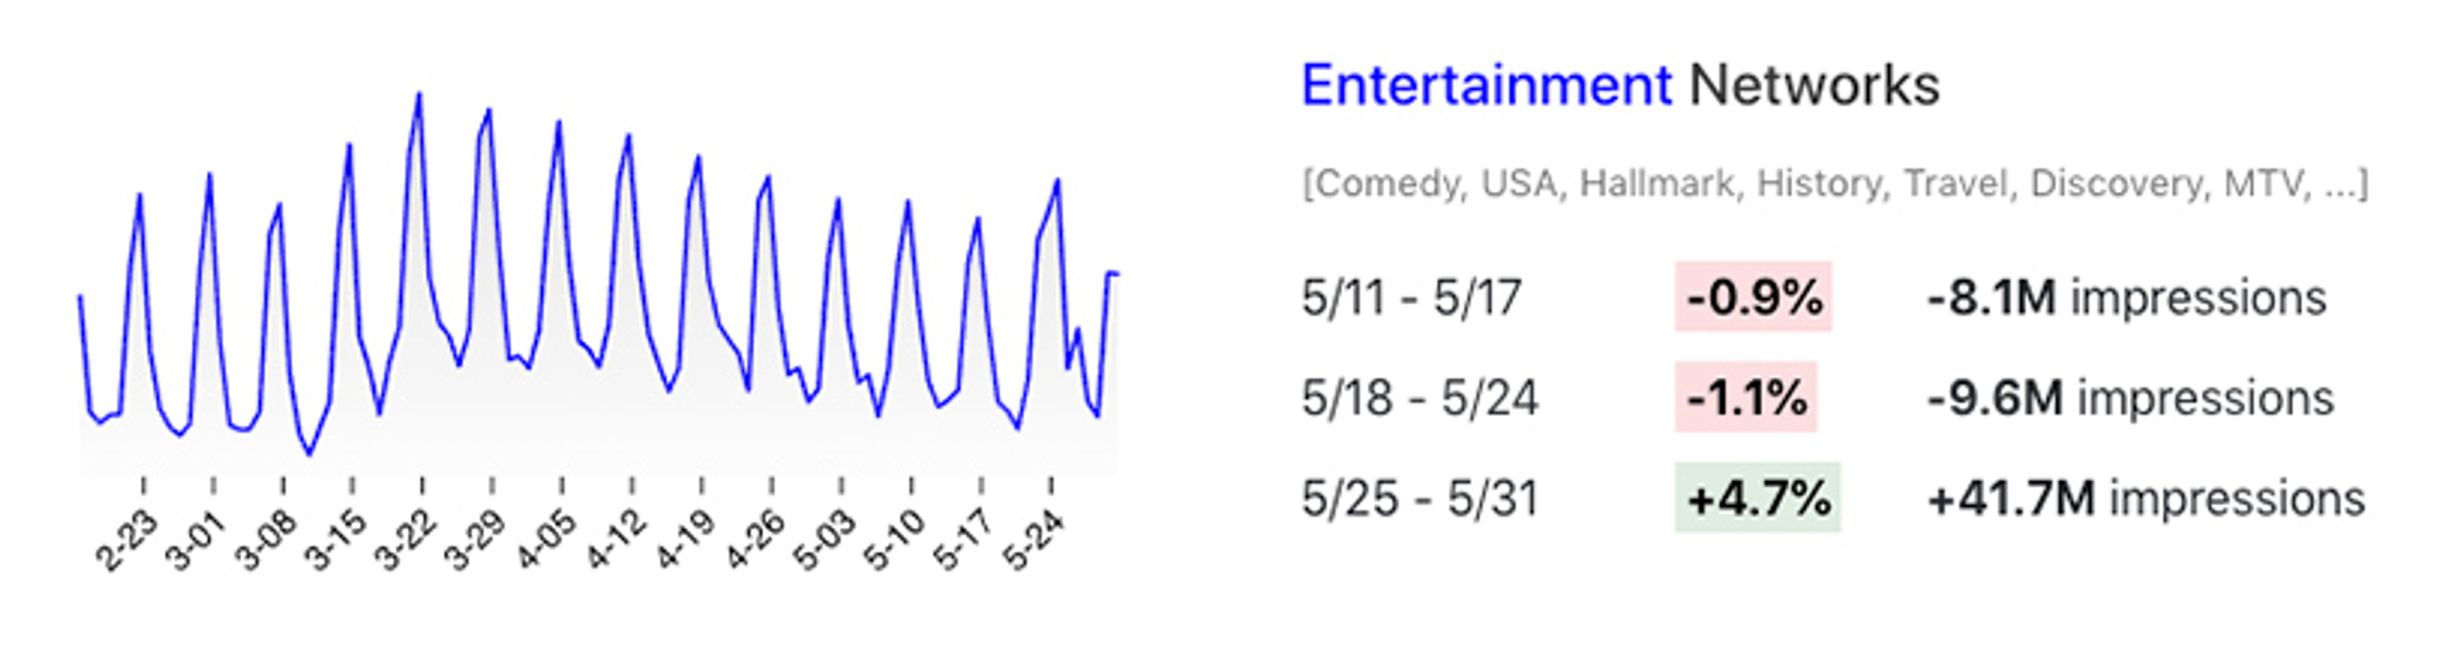 Viewership changes for entertainment networks in May 2020.